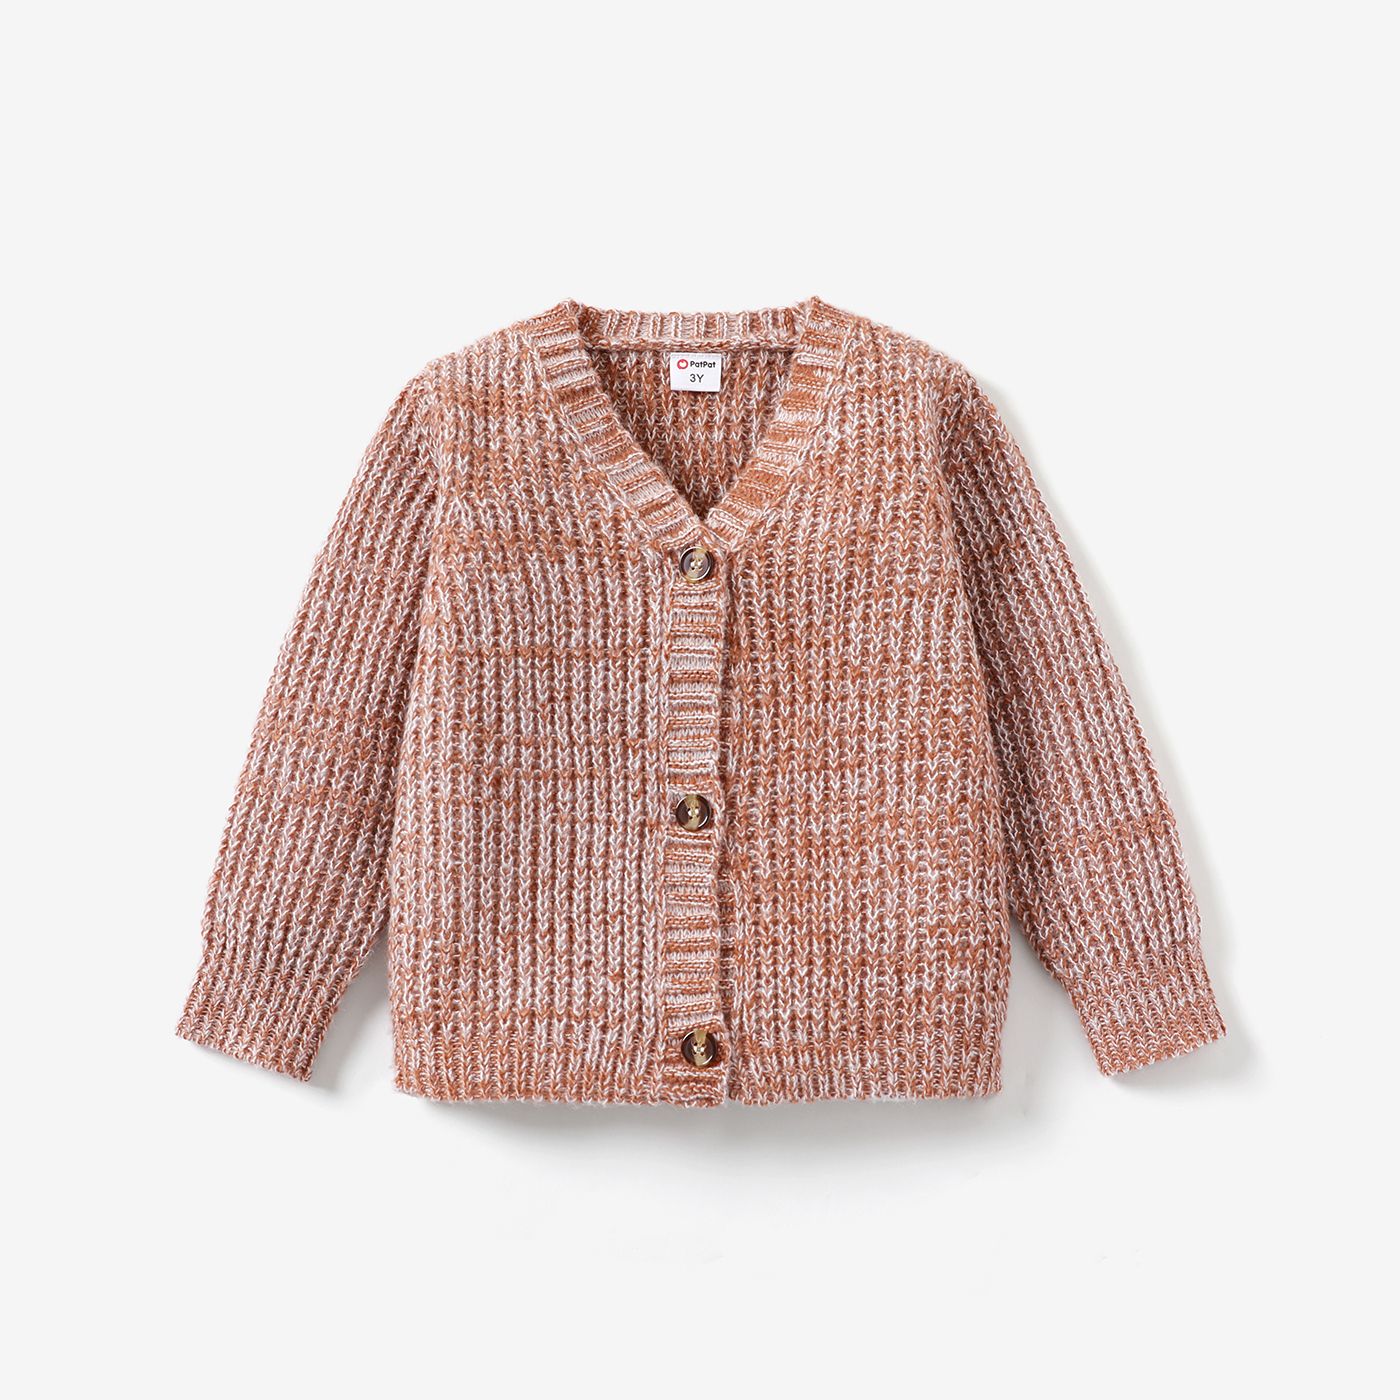 Baby Knit Cardigans Button Sweater Coat